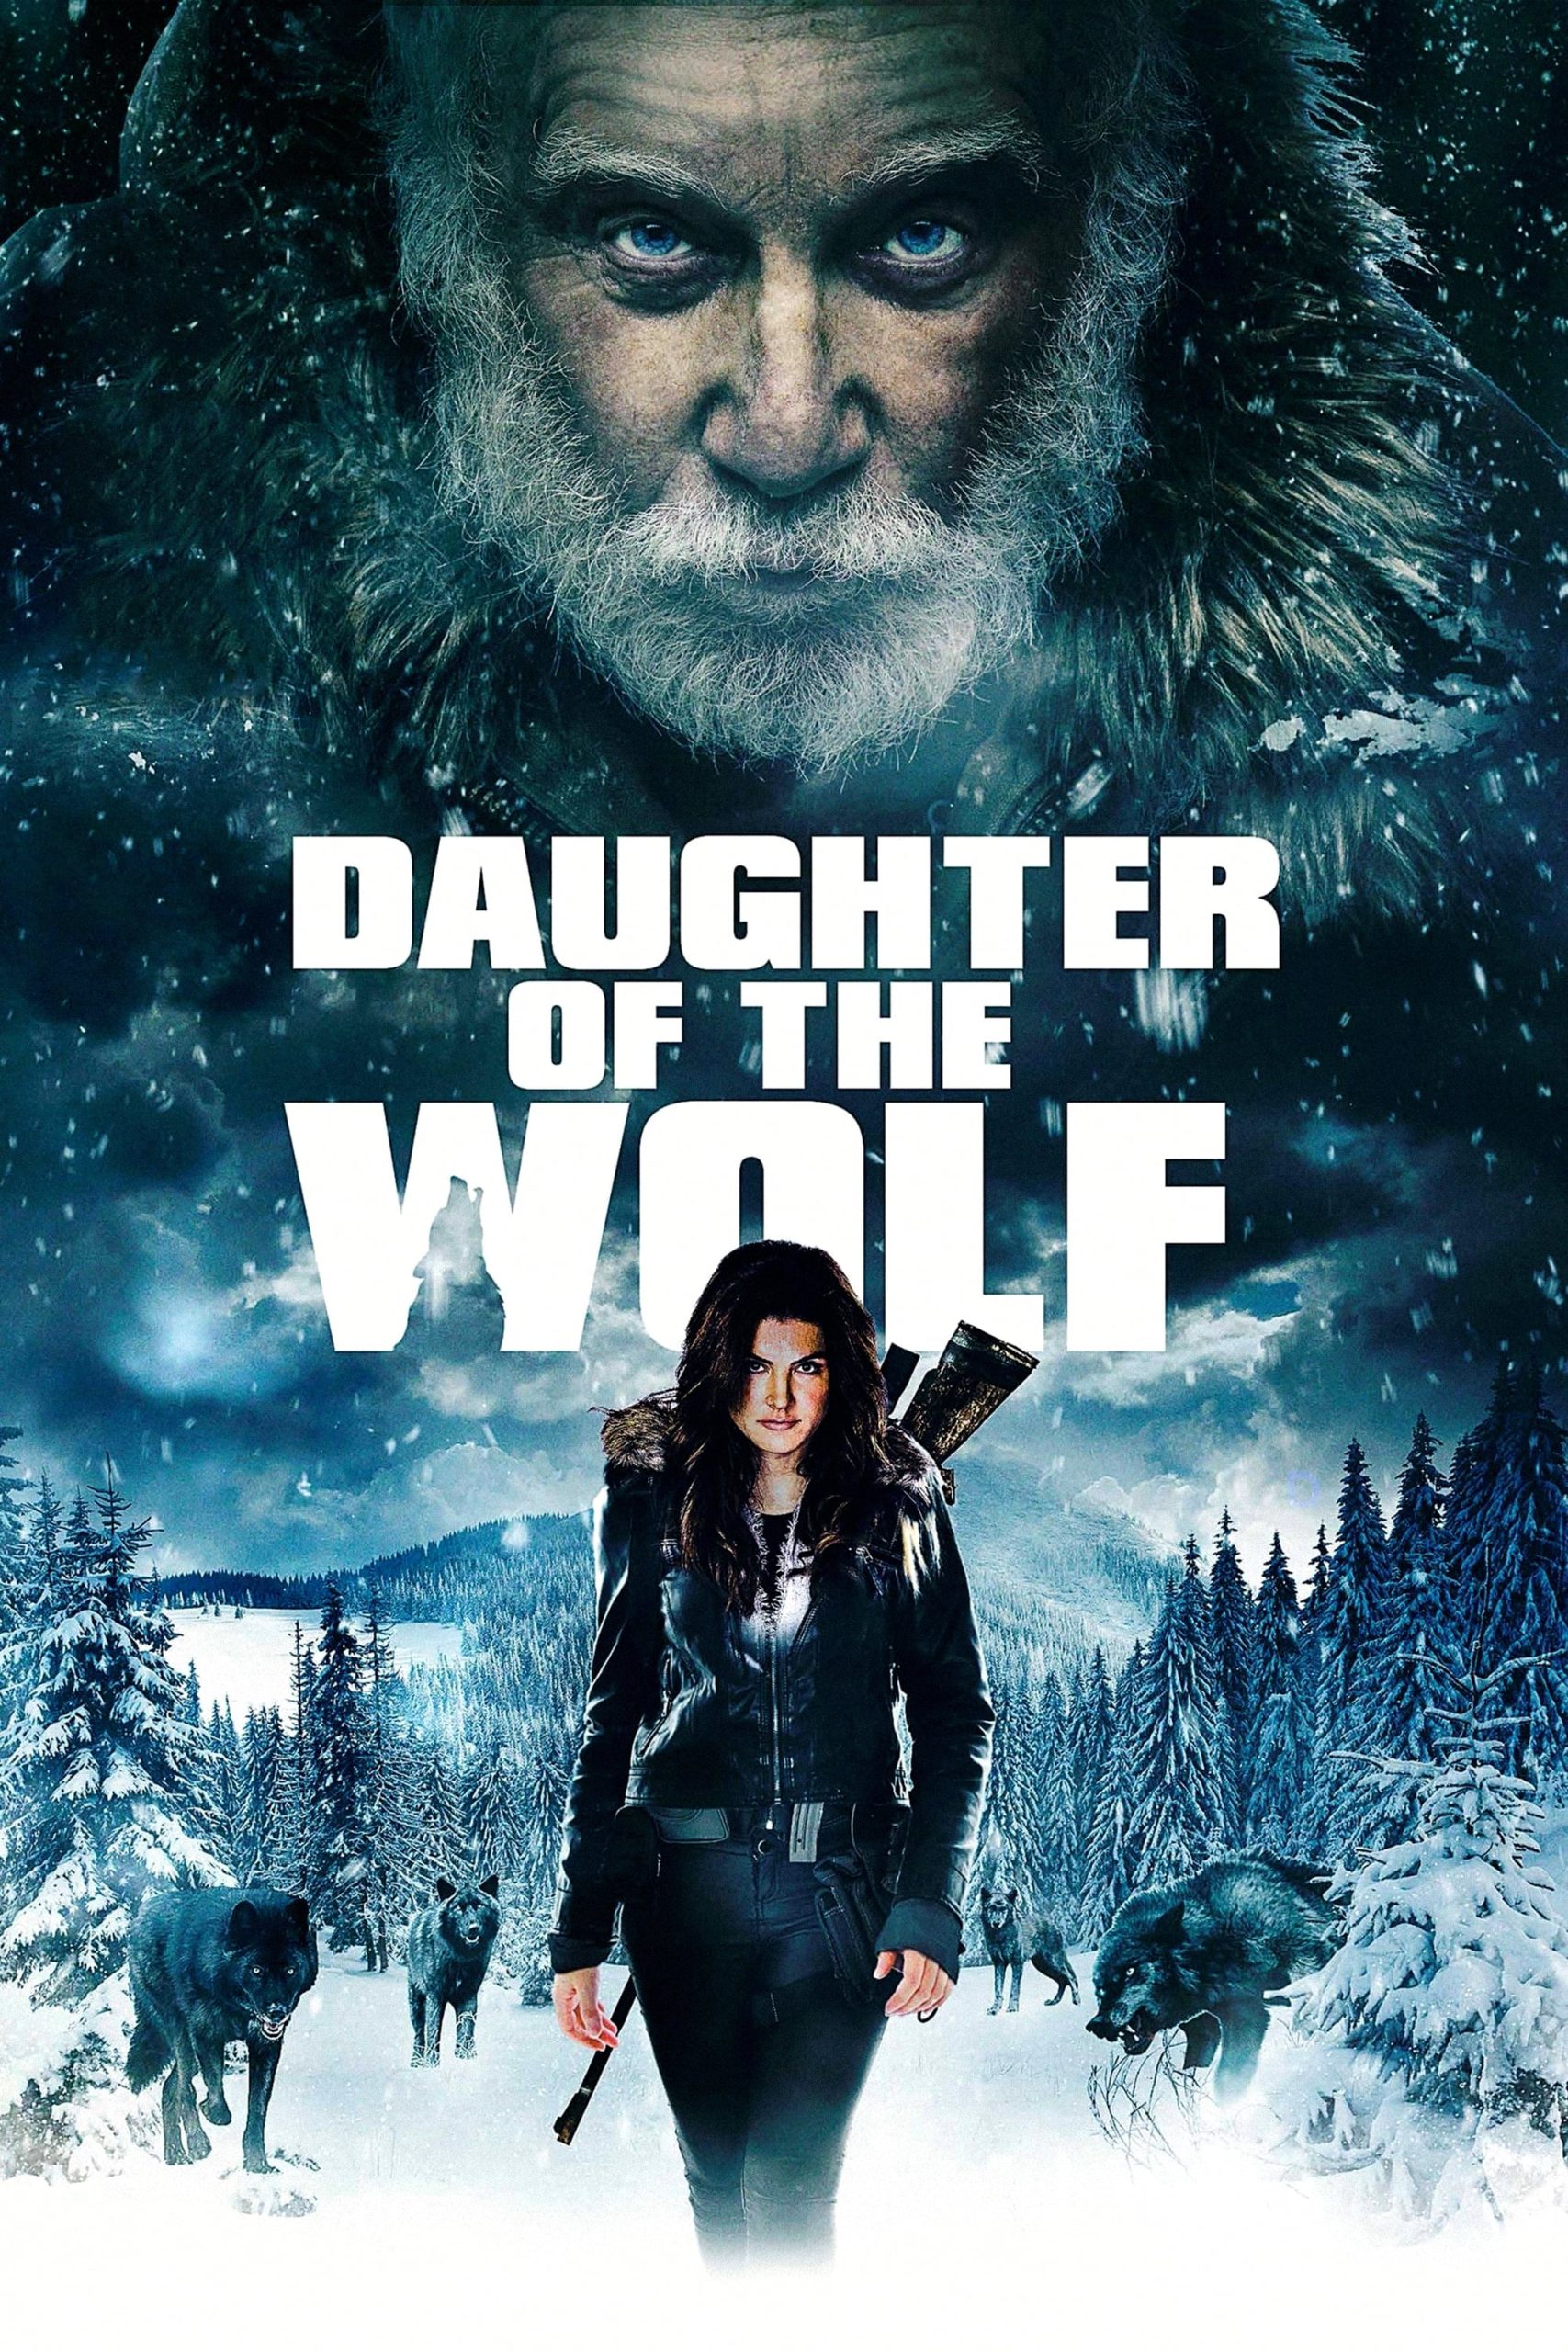 Daughter of the Wolf [HD] (2019)